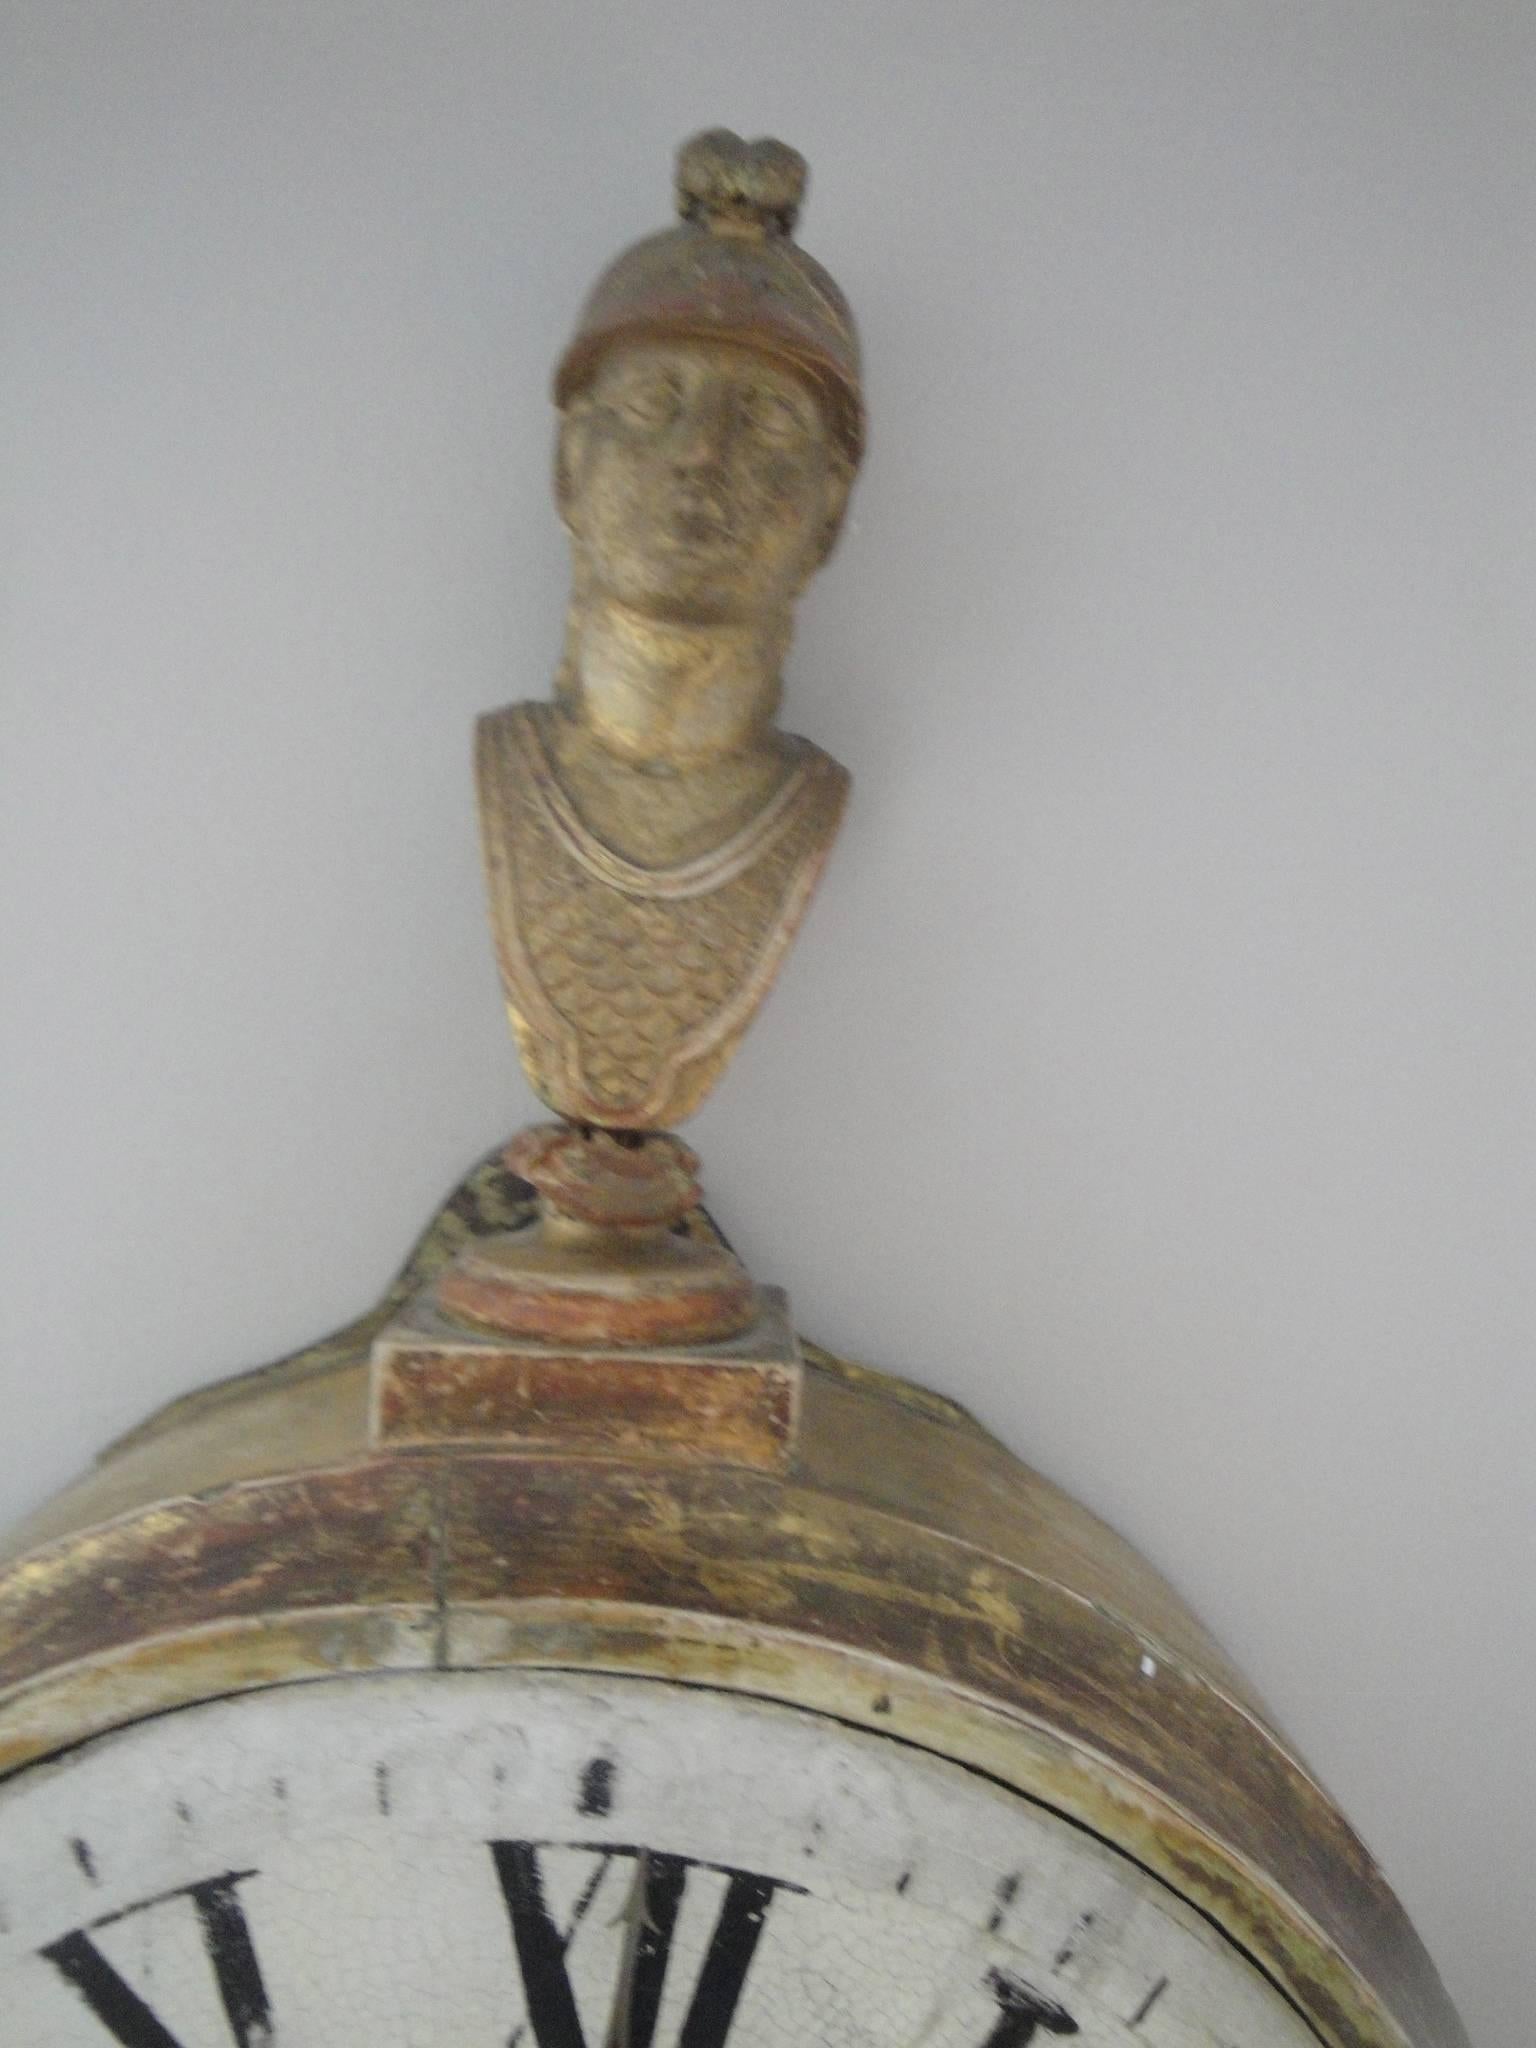 18th Century Gilded Gustavian Wall Clock In Excellent Condition For Sale In Washington, DC